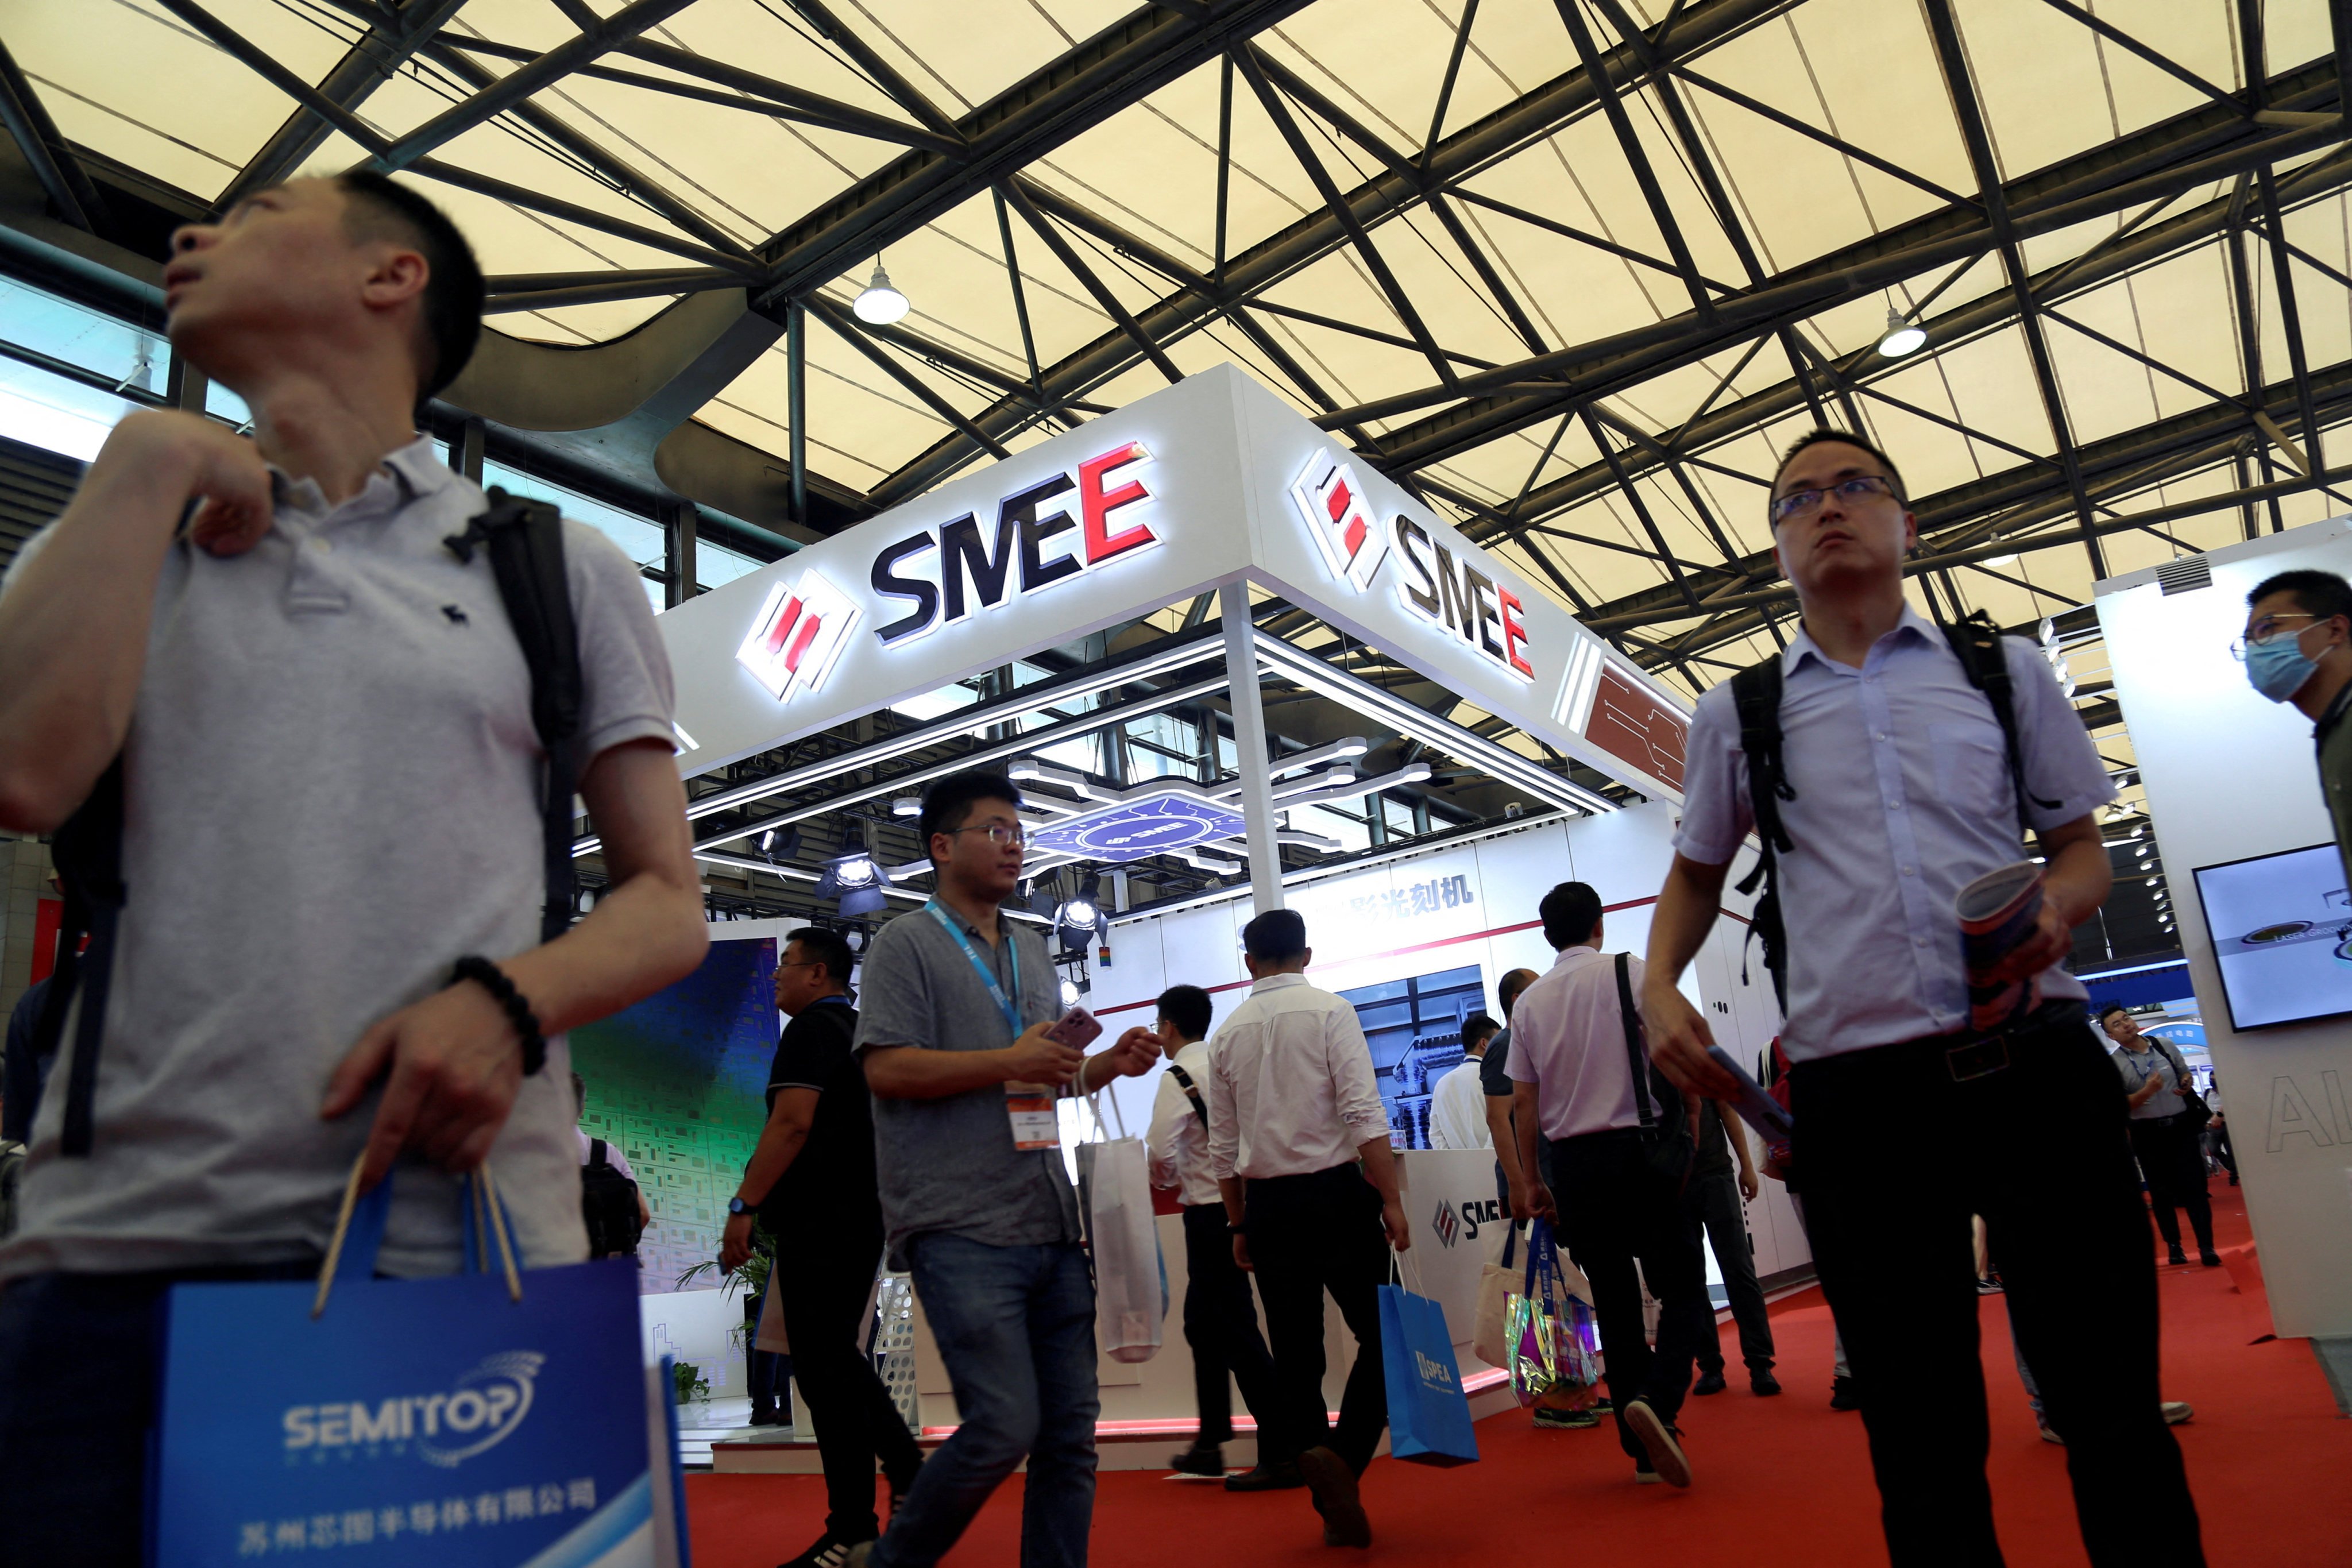 Visitors walk past the Shanghai Micro Electronics Equipment booth during Semicon China, a trade fair for the semiconductor industry, in Shanghai on June 29. Since 2018, the US has unleashed measures aiming to restrict China’s access to advanced chips and the equipment used to make them. Photo: Reuters